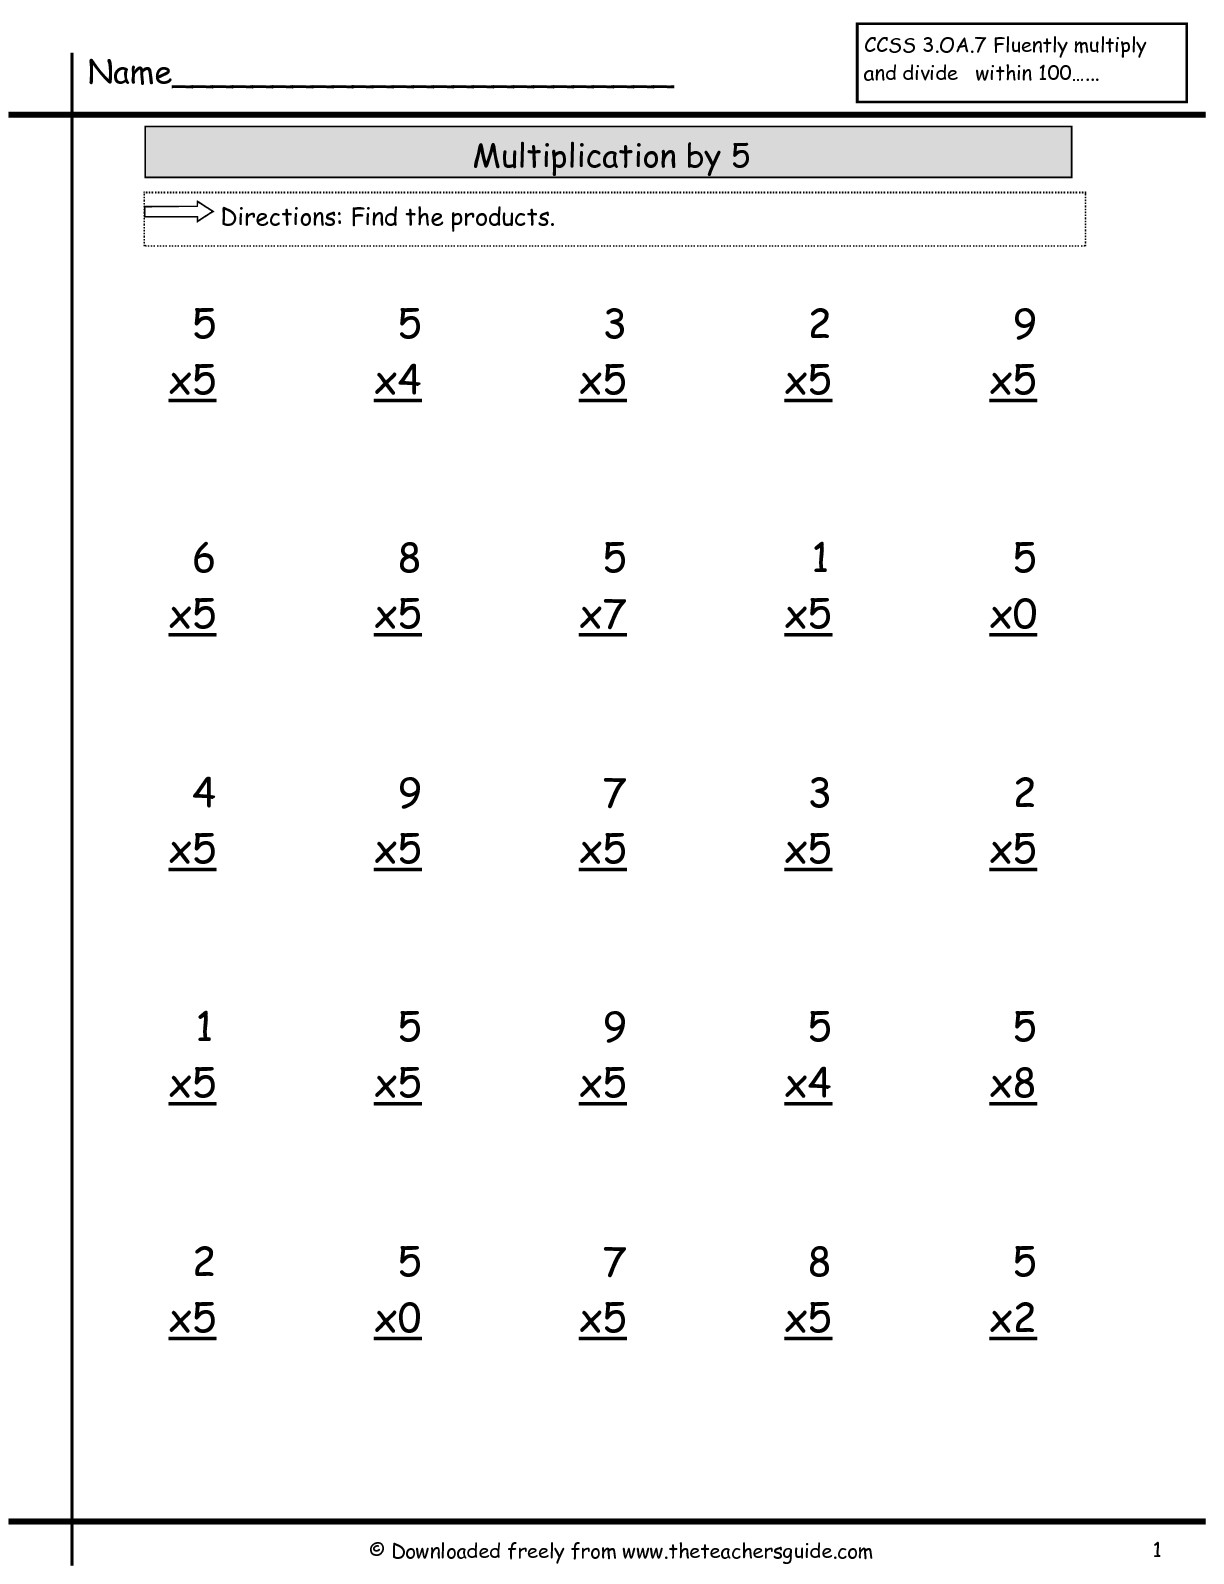 Multiplication Facts Worksheets From The Teacher's Guide regarding Multiplication Worksheets Up To 5